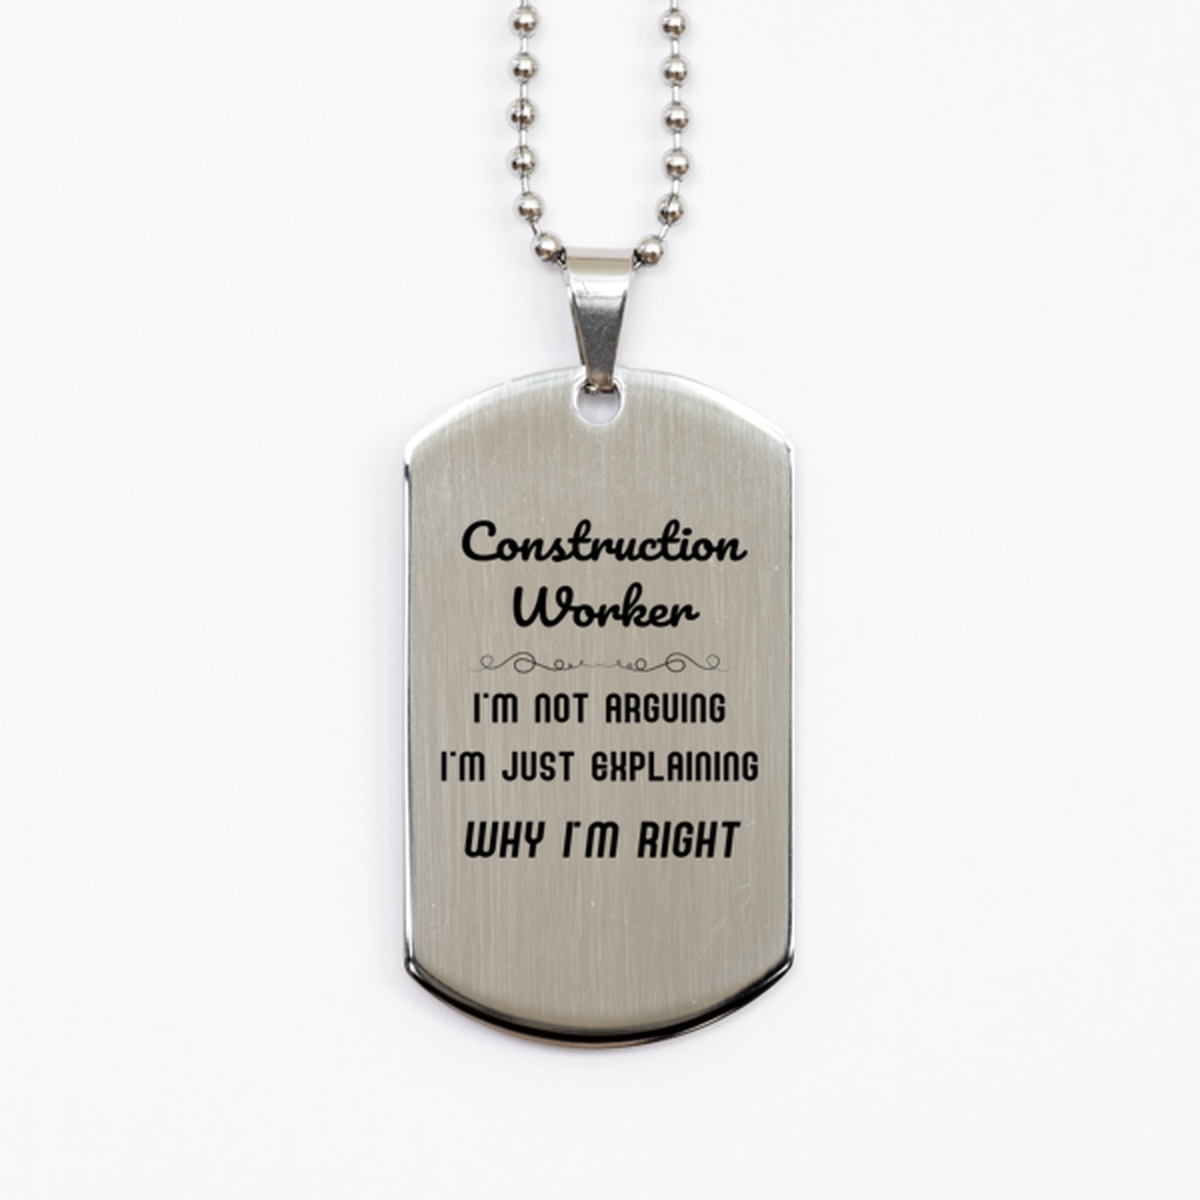 Construction Worker I'm not Arguing. I'm Just Explaining Why I'm RIGHT Silver Dog Tag, Funny Saying Quote Construction Worker Gifts For Construction Worker Graduation Birthday Christmas Gifts for Men Women Coworker